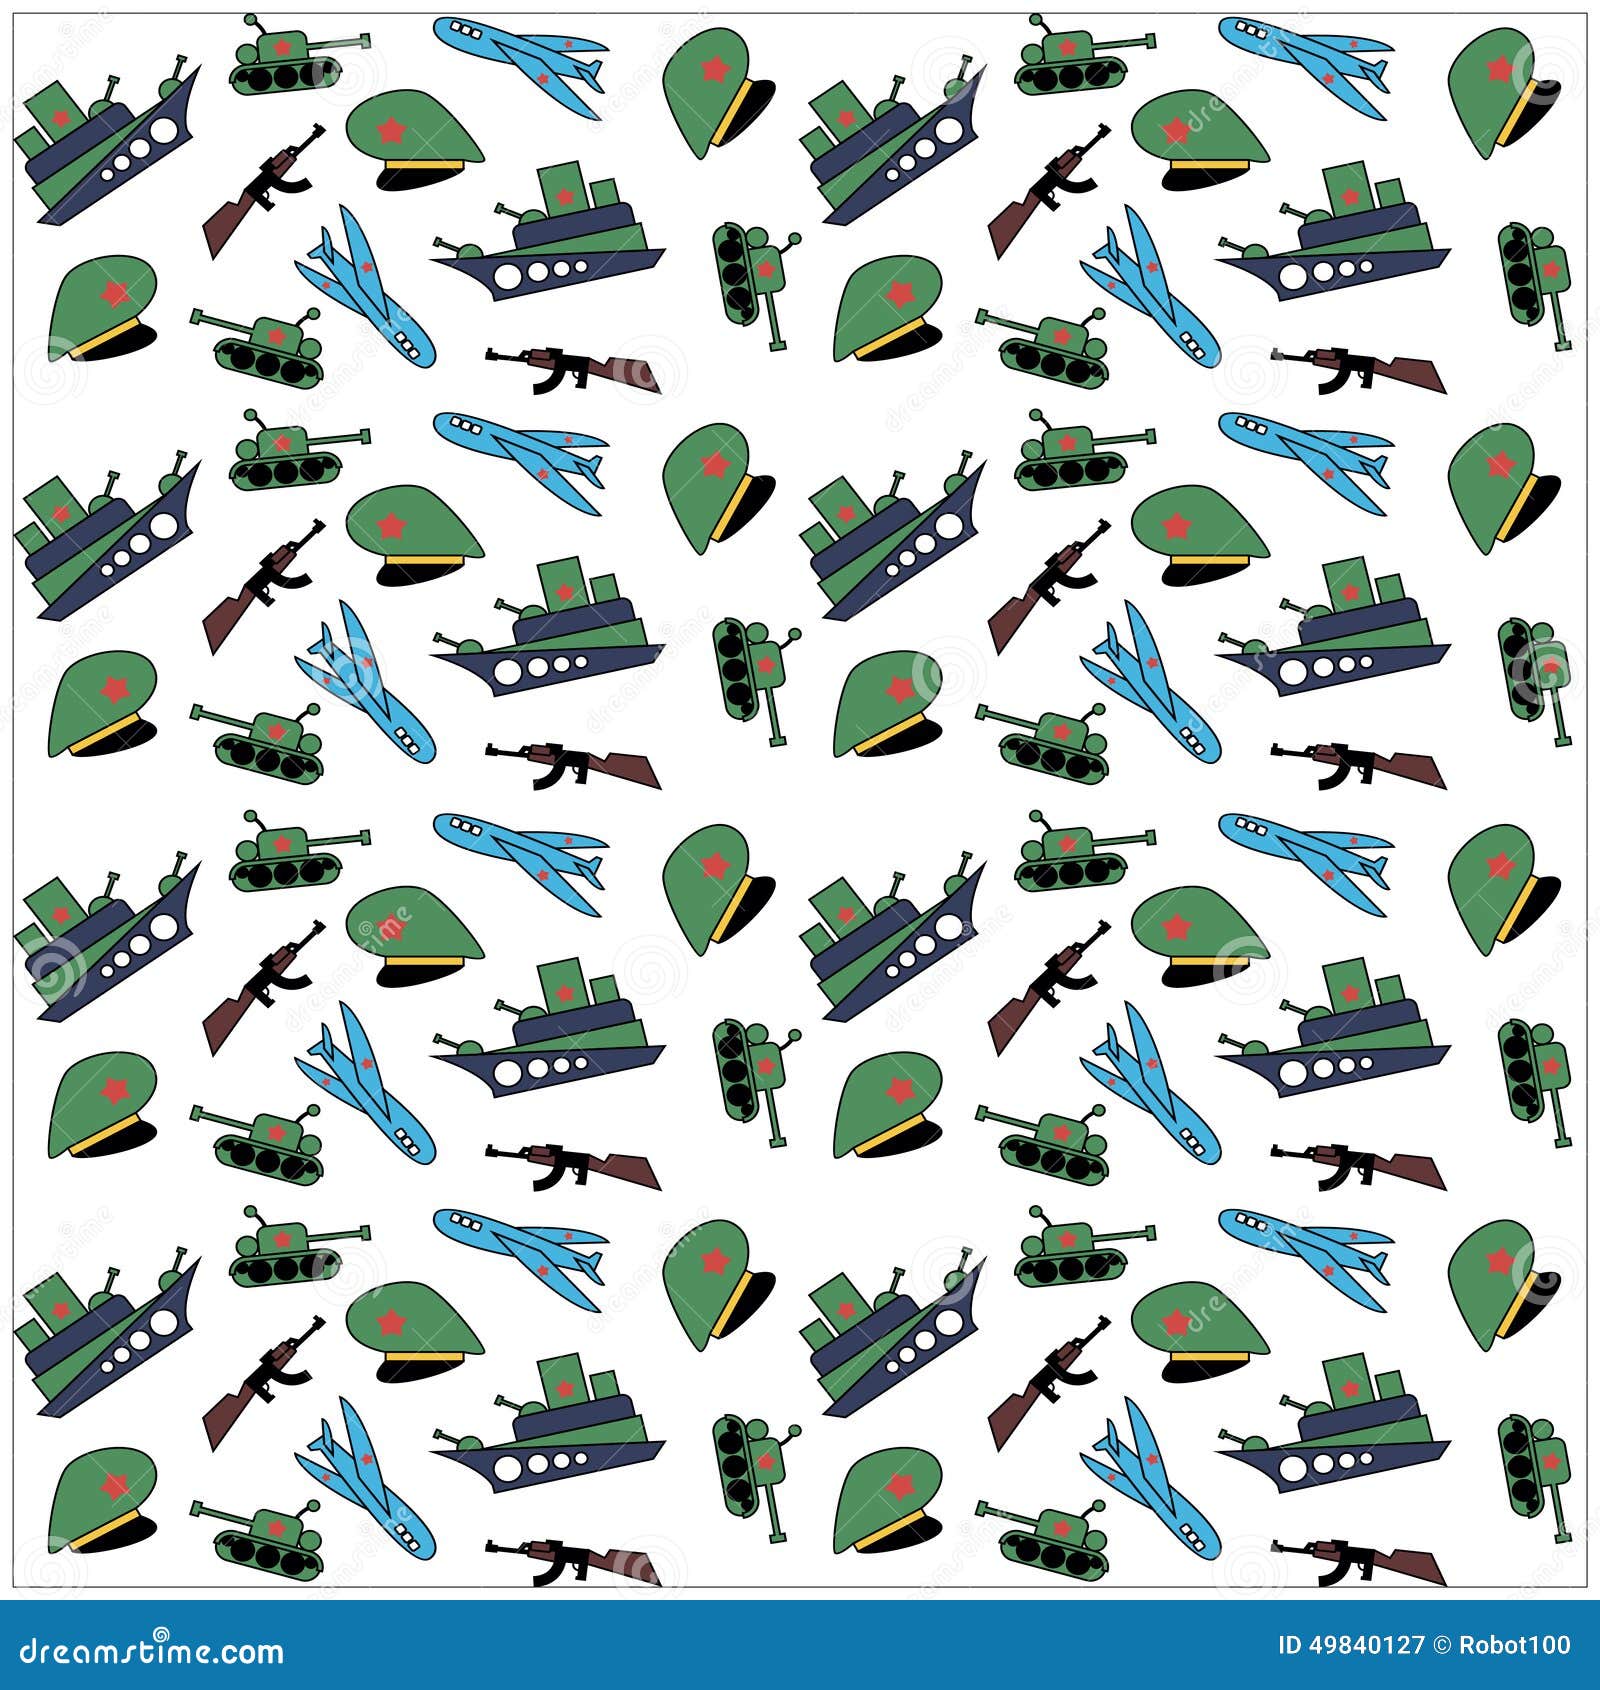 February 23. Military Background Stock Vector - Illustration of ...